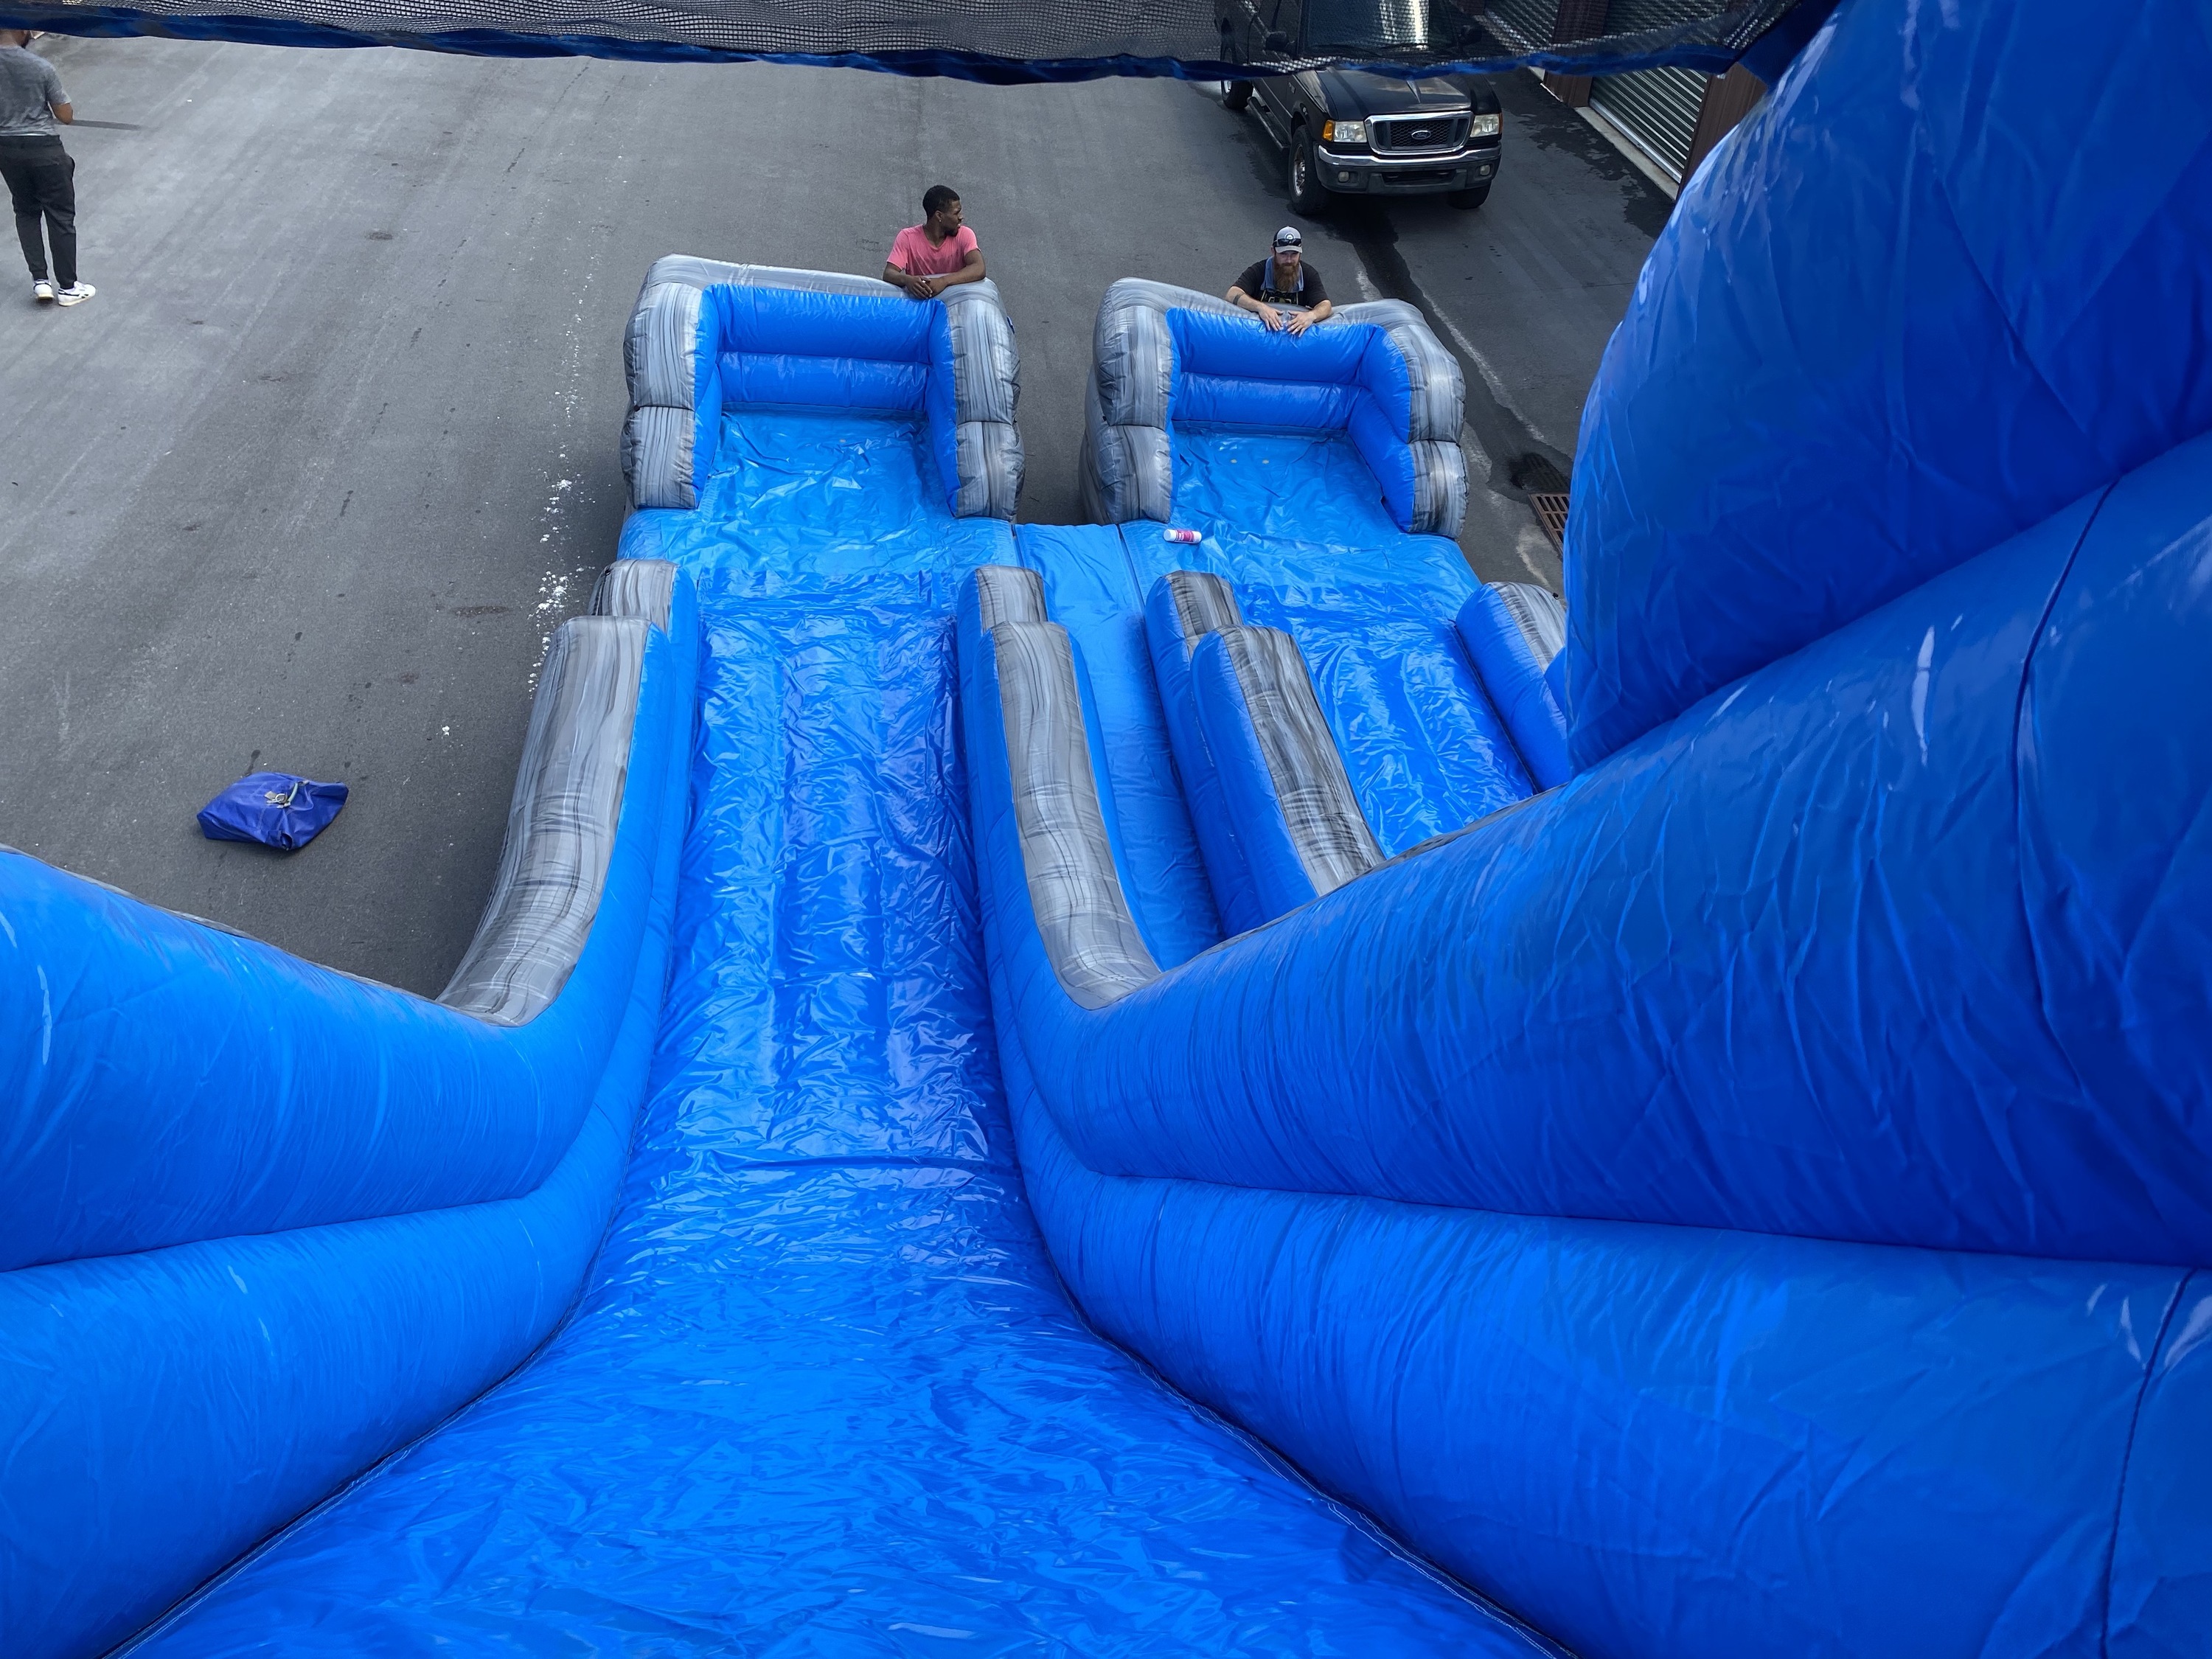 Big Bounce Party Rentals LLC Bounce House Rentals and slides for